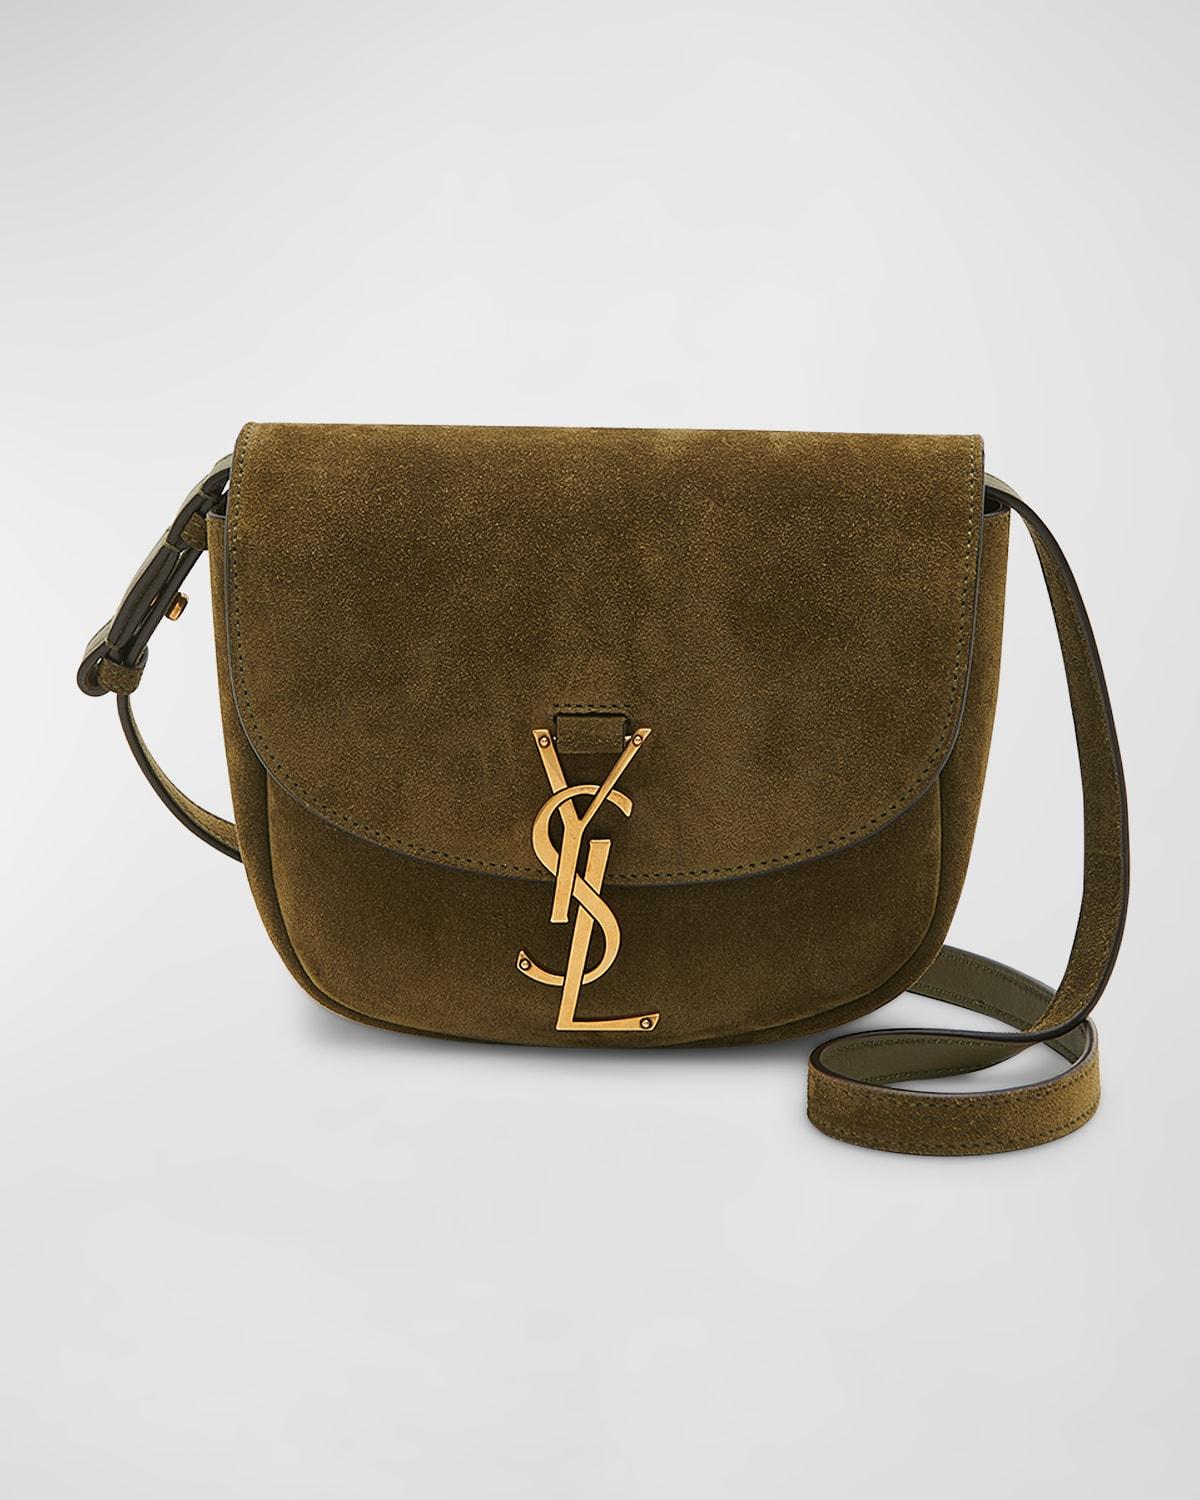 Saint Laurent Kaia Small Suede Crossbody Bag in Green | Lyst